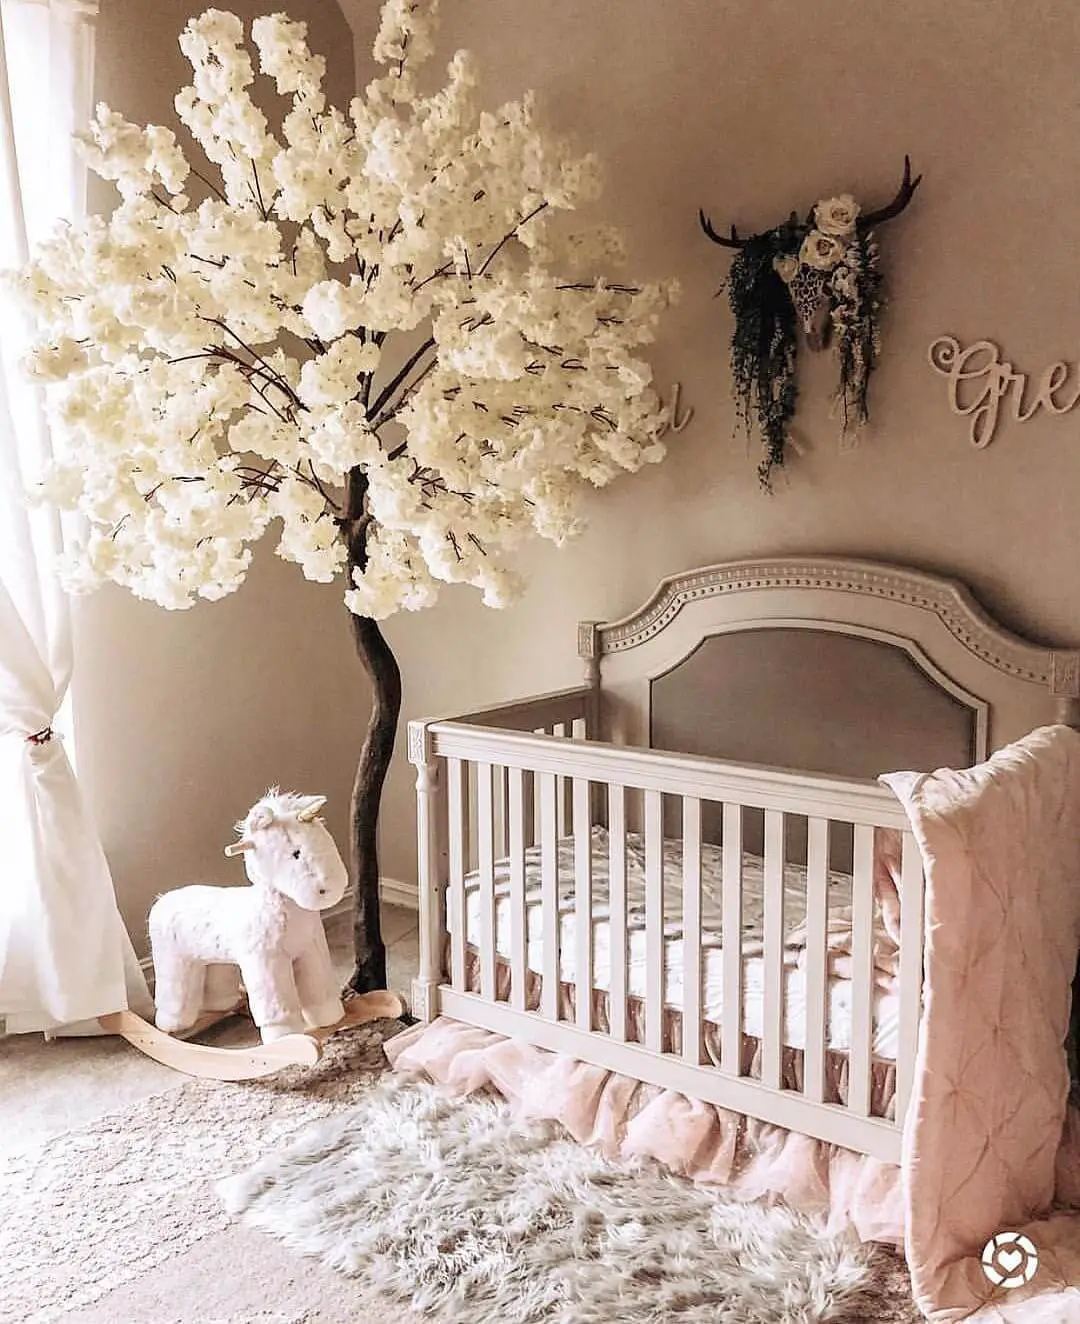 50 Inspiring Nursery Ideas for Your Baby Girl - Cute Designs You'll Love